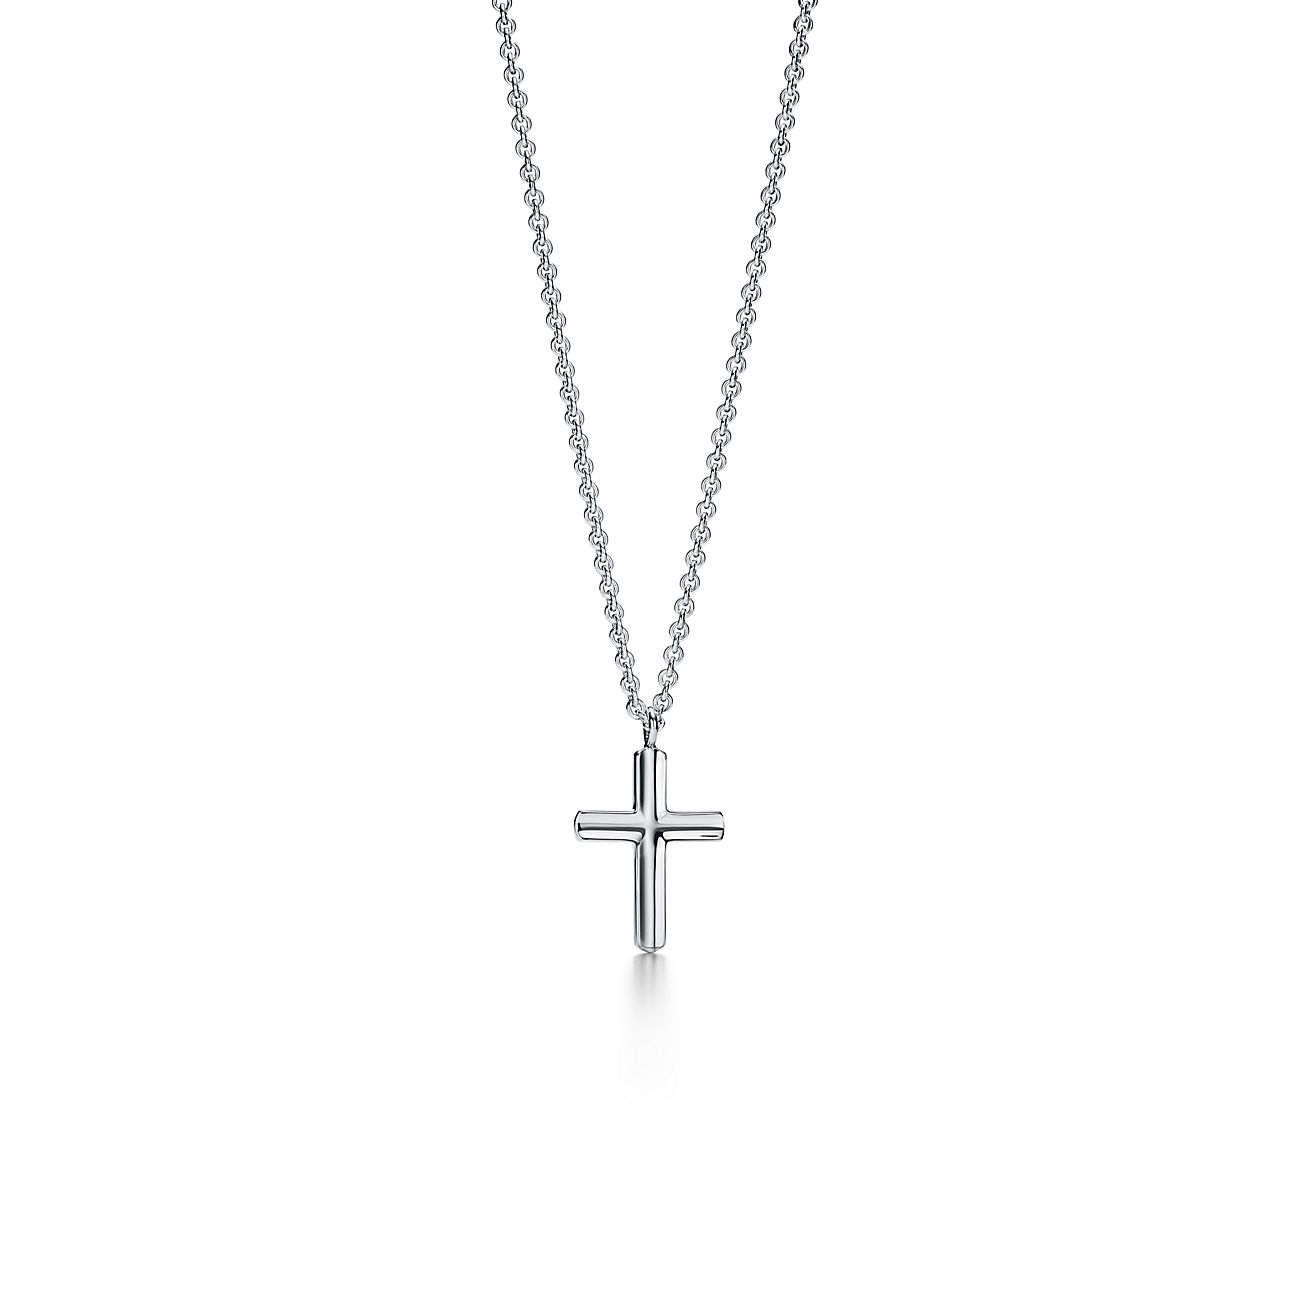 Details about   14k Yellow Gold over 925 Sterling Silver Charm Pendant Cross 1" 